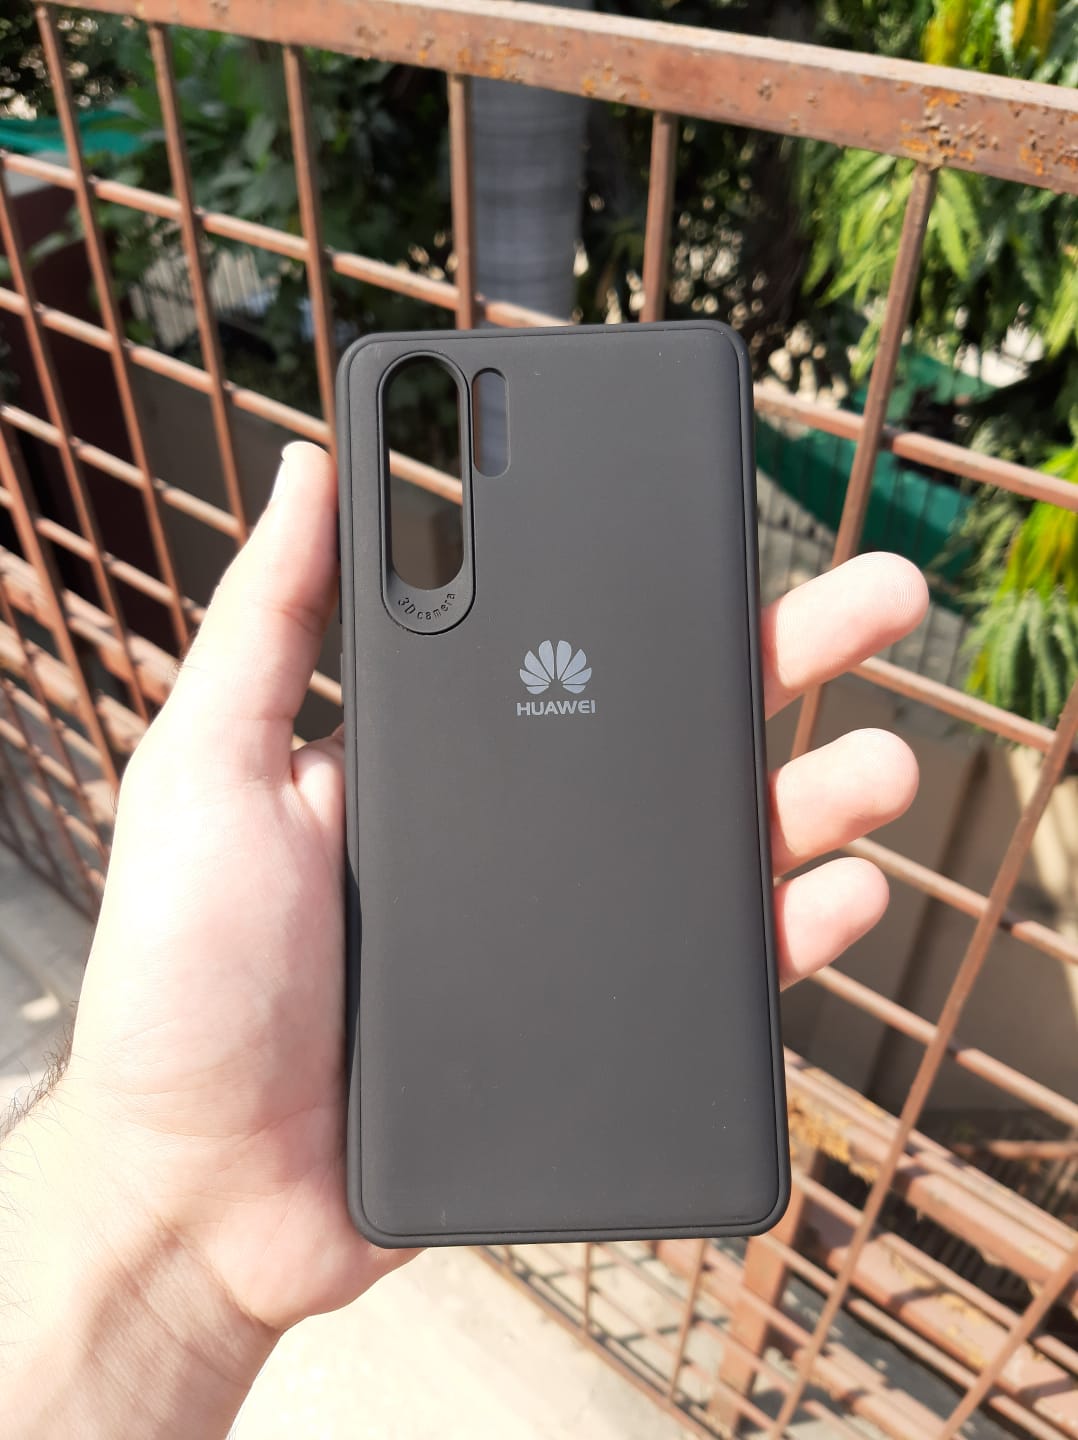 Huawei "P30 Pro" Soft Silicone Cases